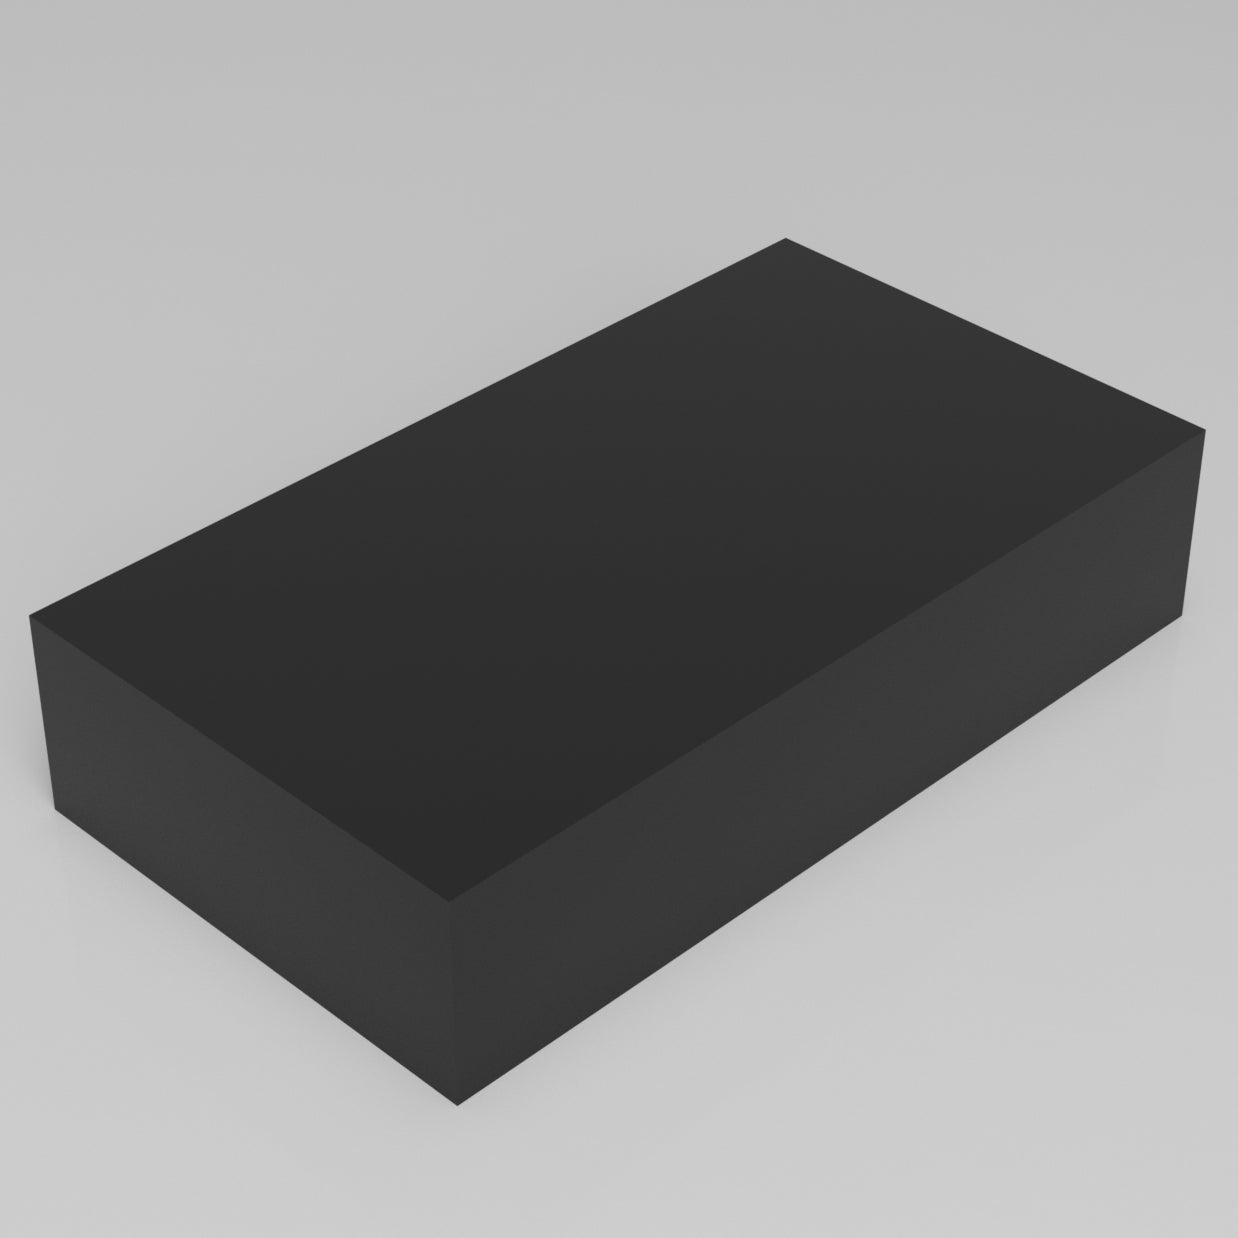 Machinable Wax Rectangular Block Front View 4 Inch by 10 Inch by 18 Inch